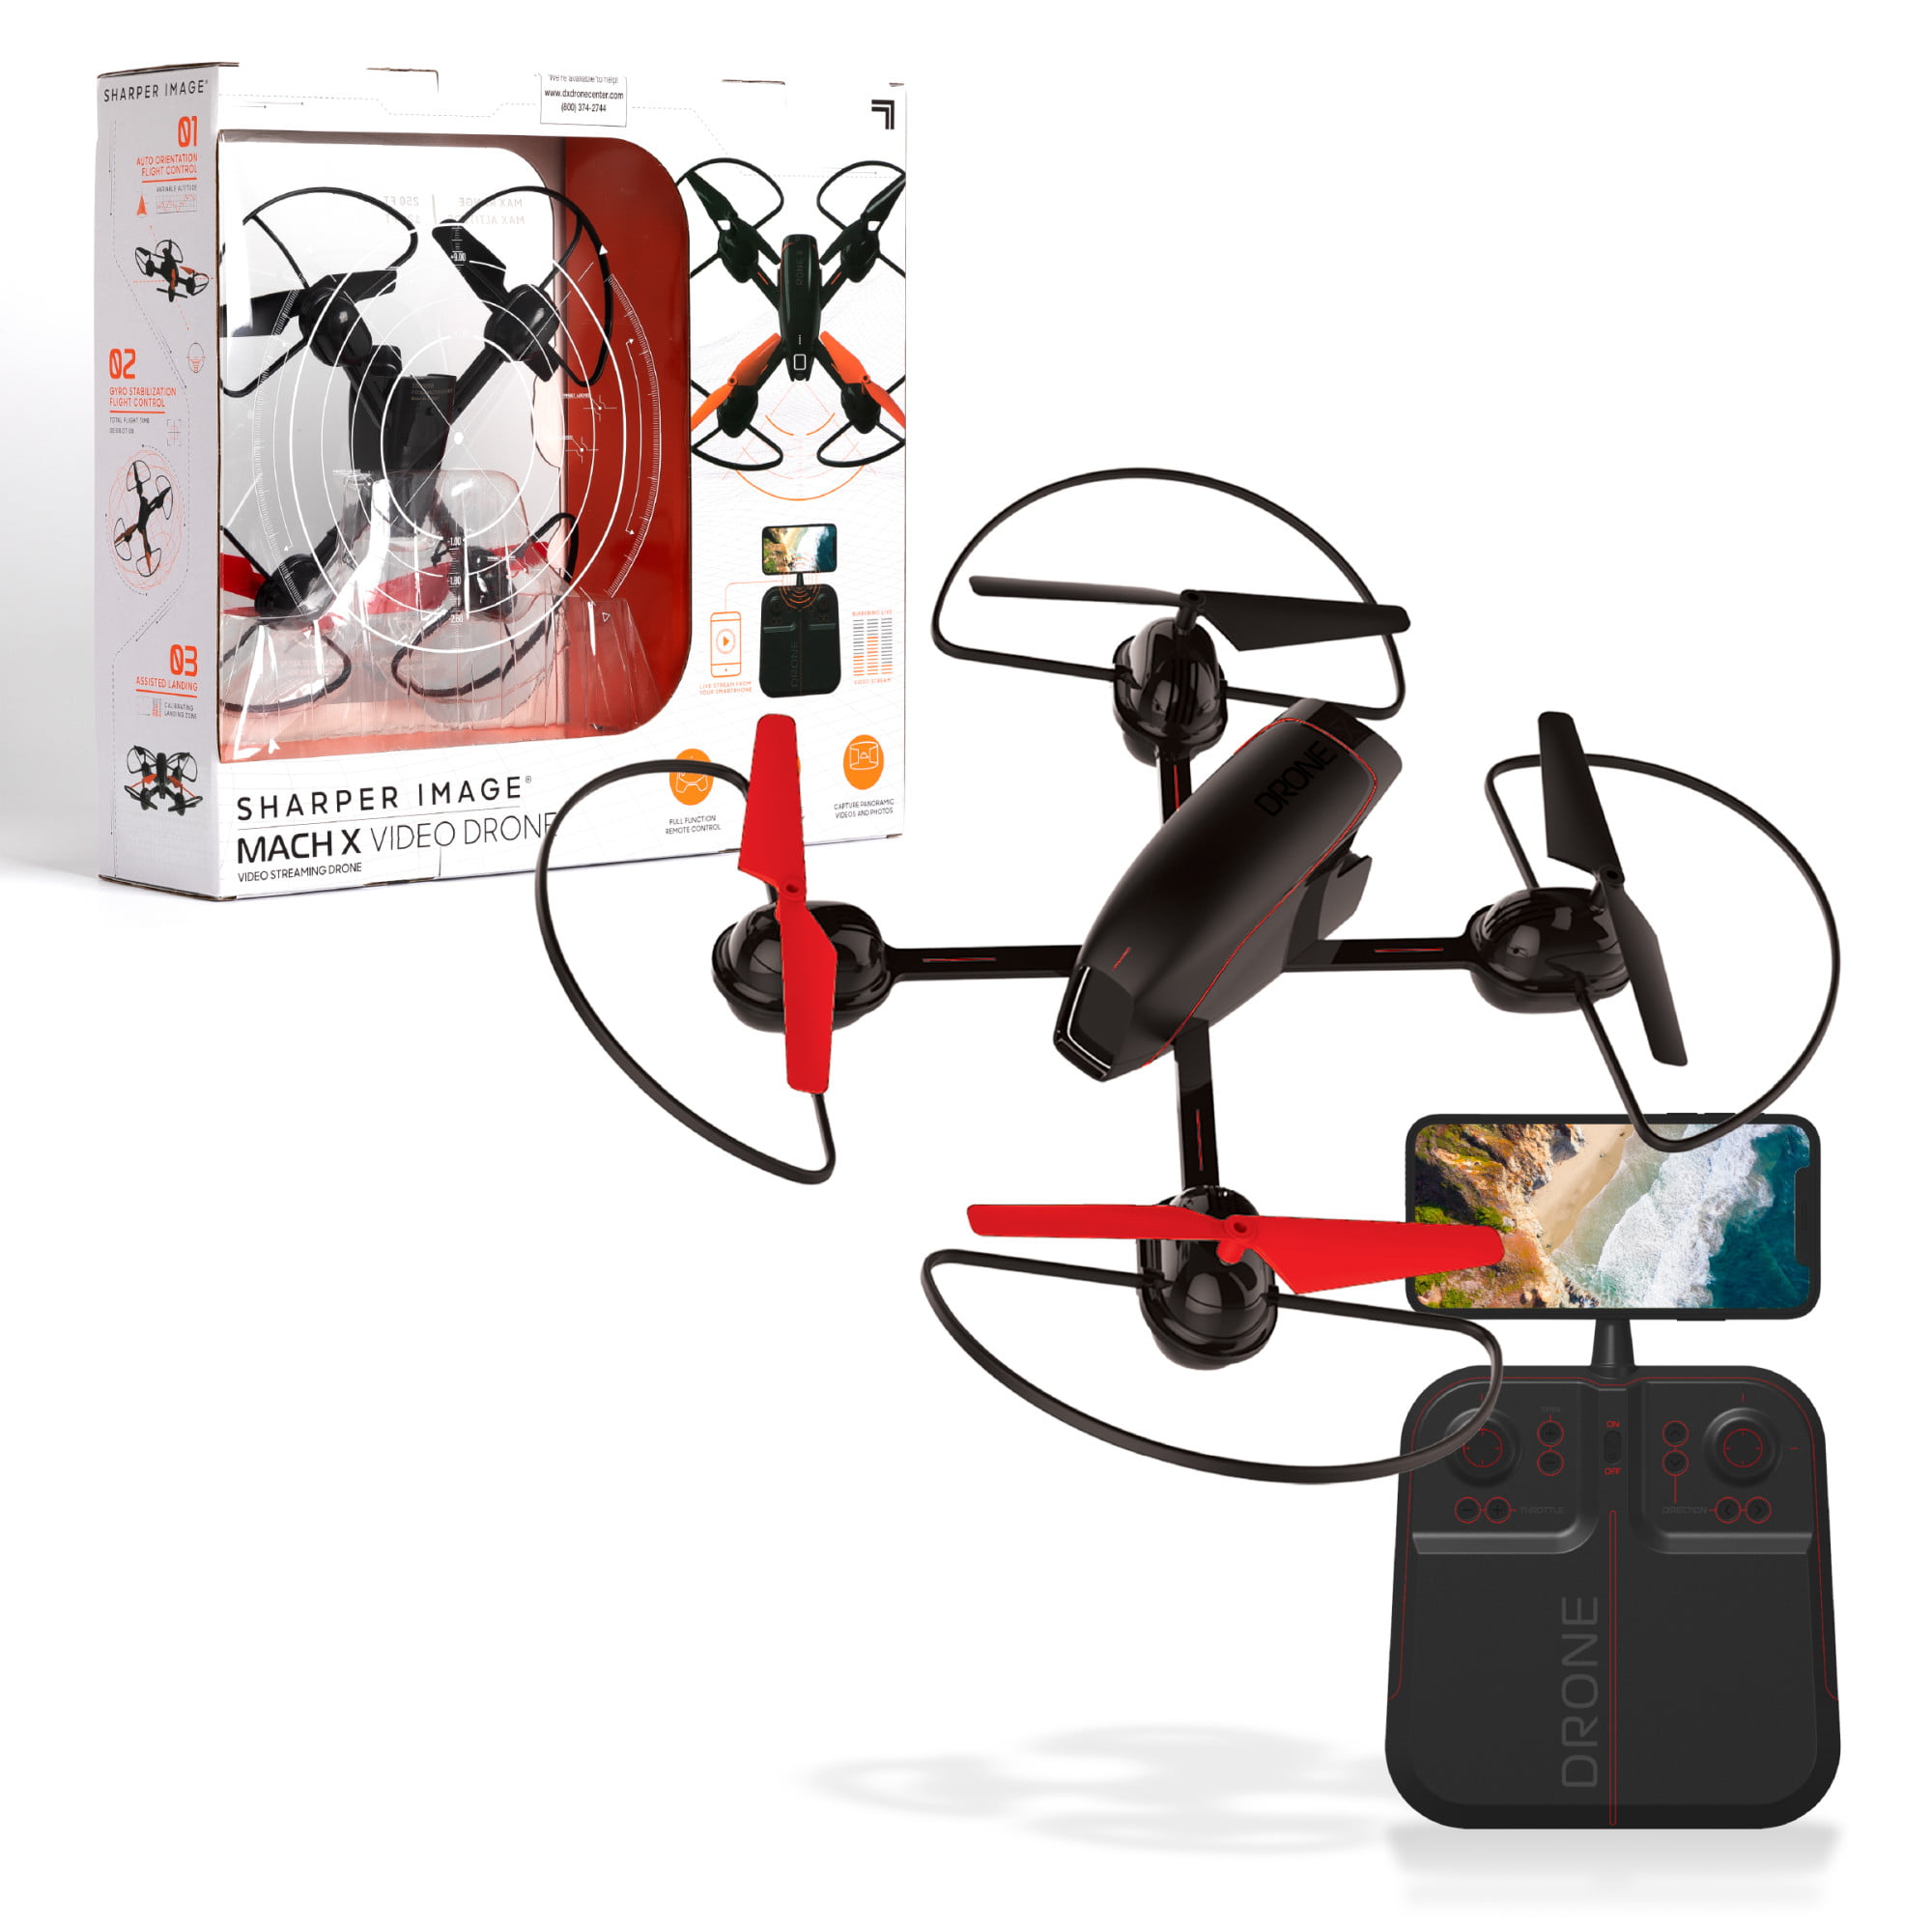 Sharper Image 10" Mach X Drone with Streaming Camera, 2.4 GHz, Auto-Orientation Control